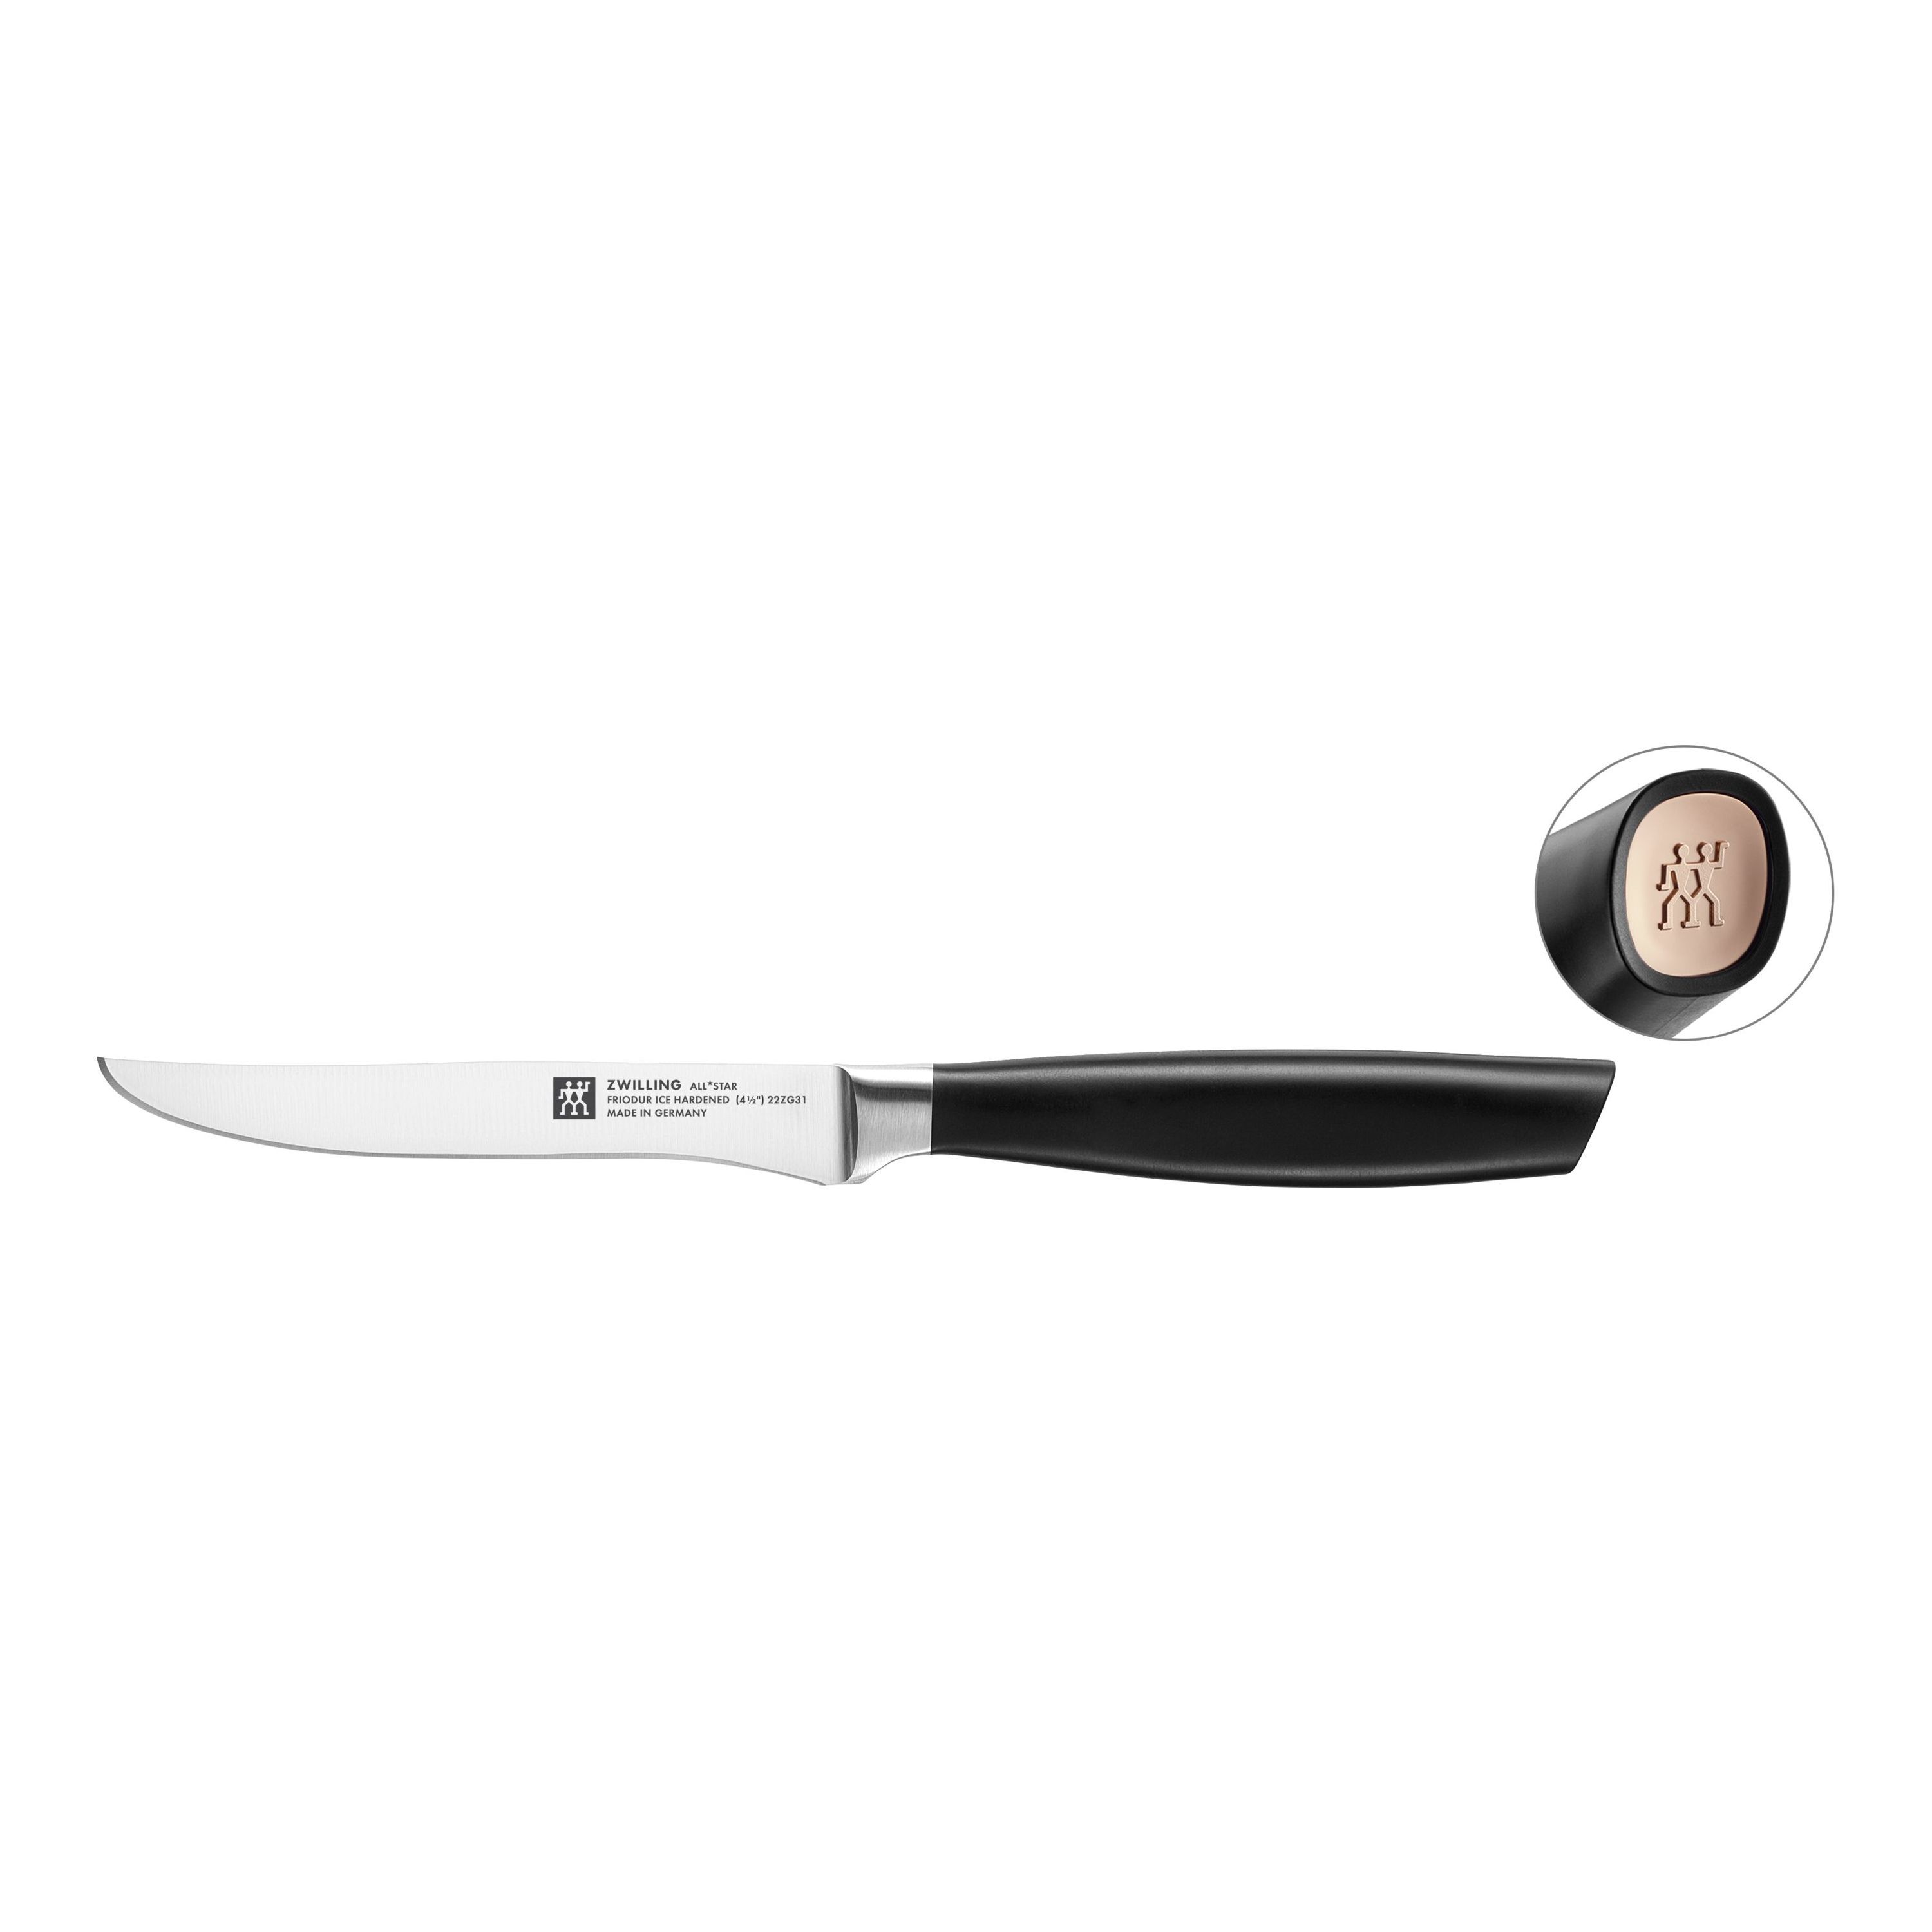 ZWILLING All * Star Couteau à steak 12 cm, or rose